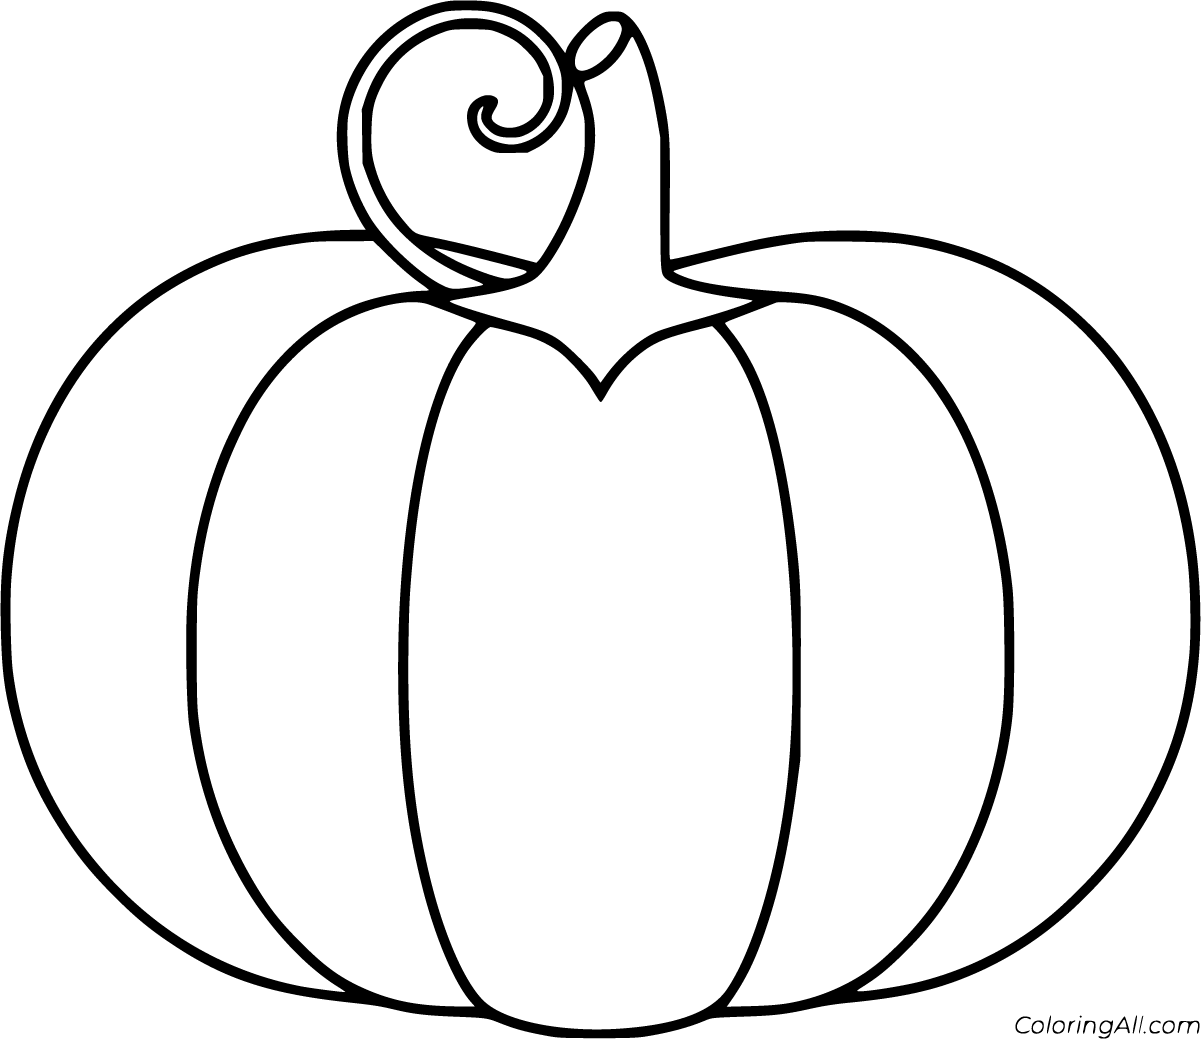 pumpkin-coloring-pages-coloringall